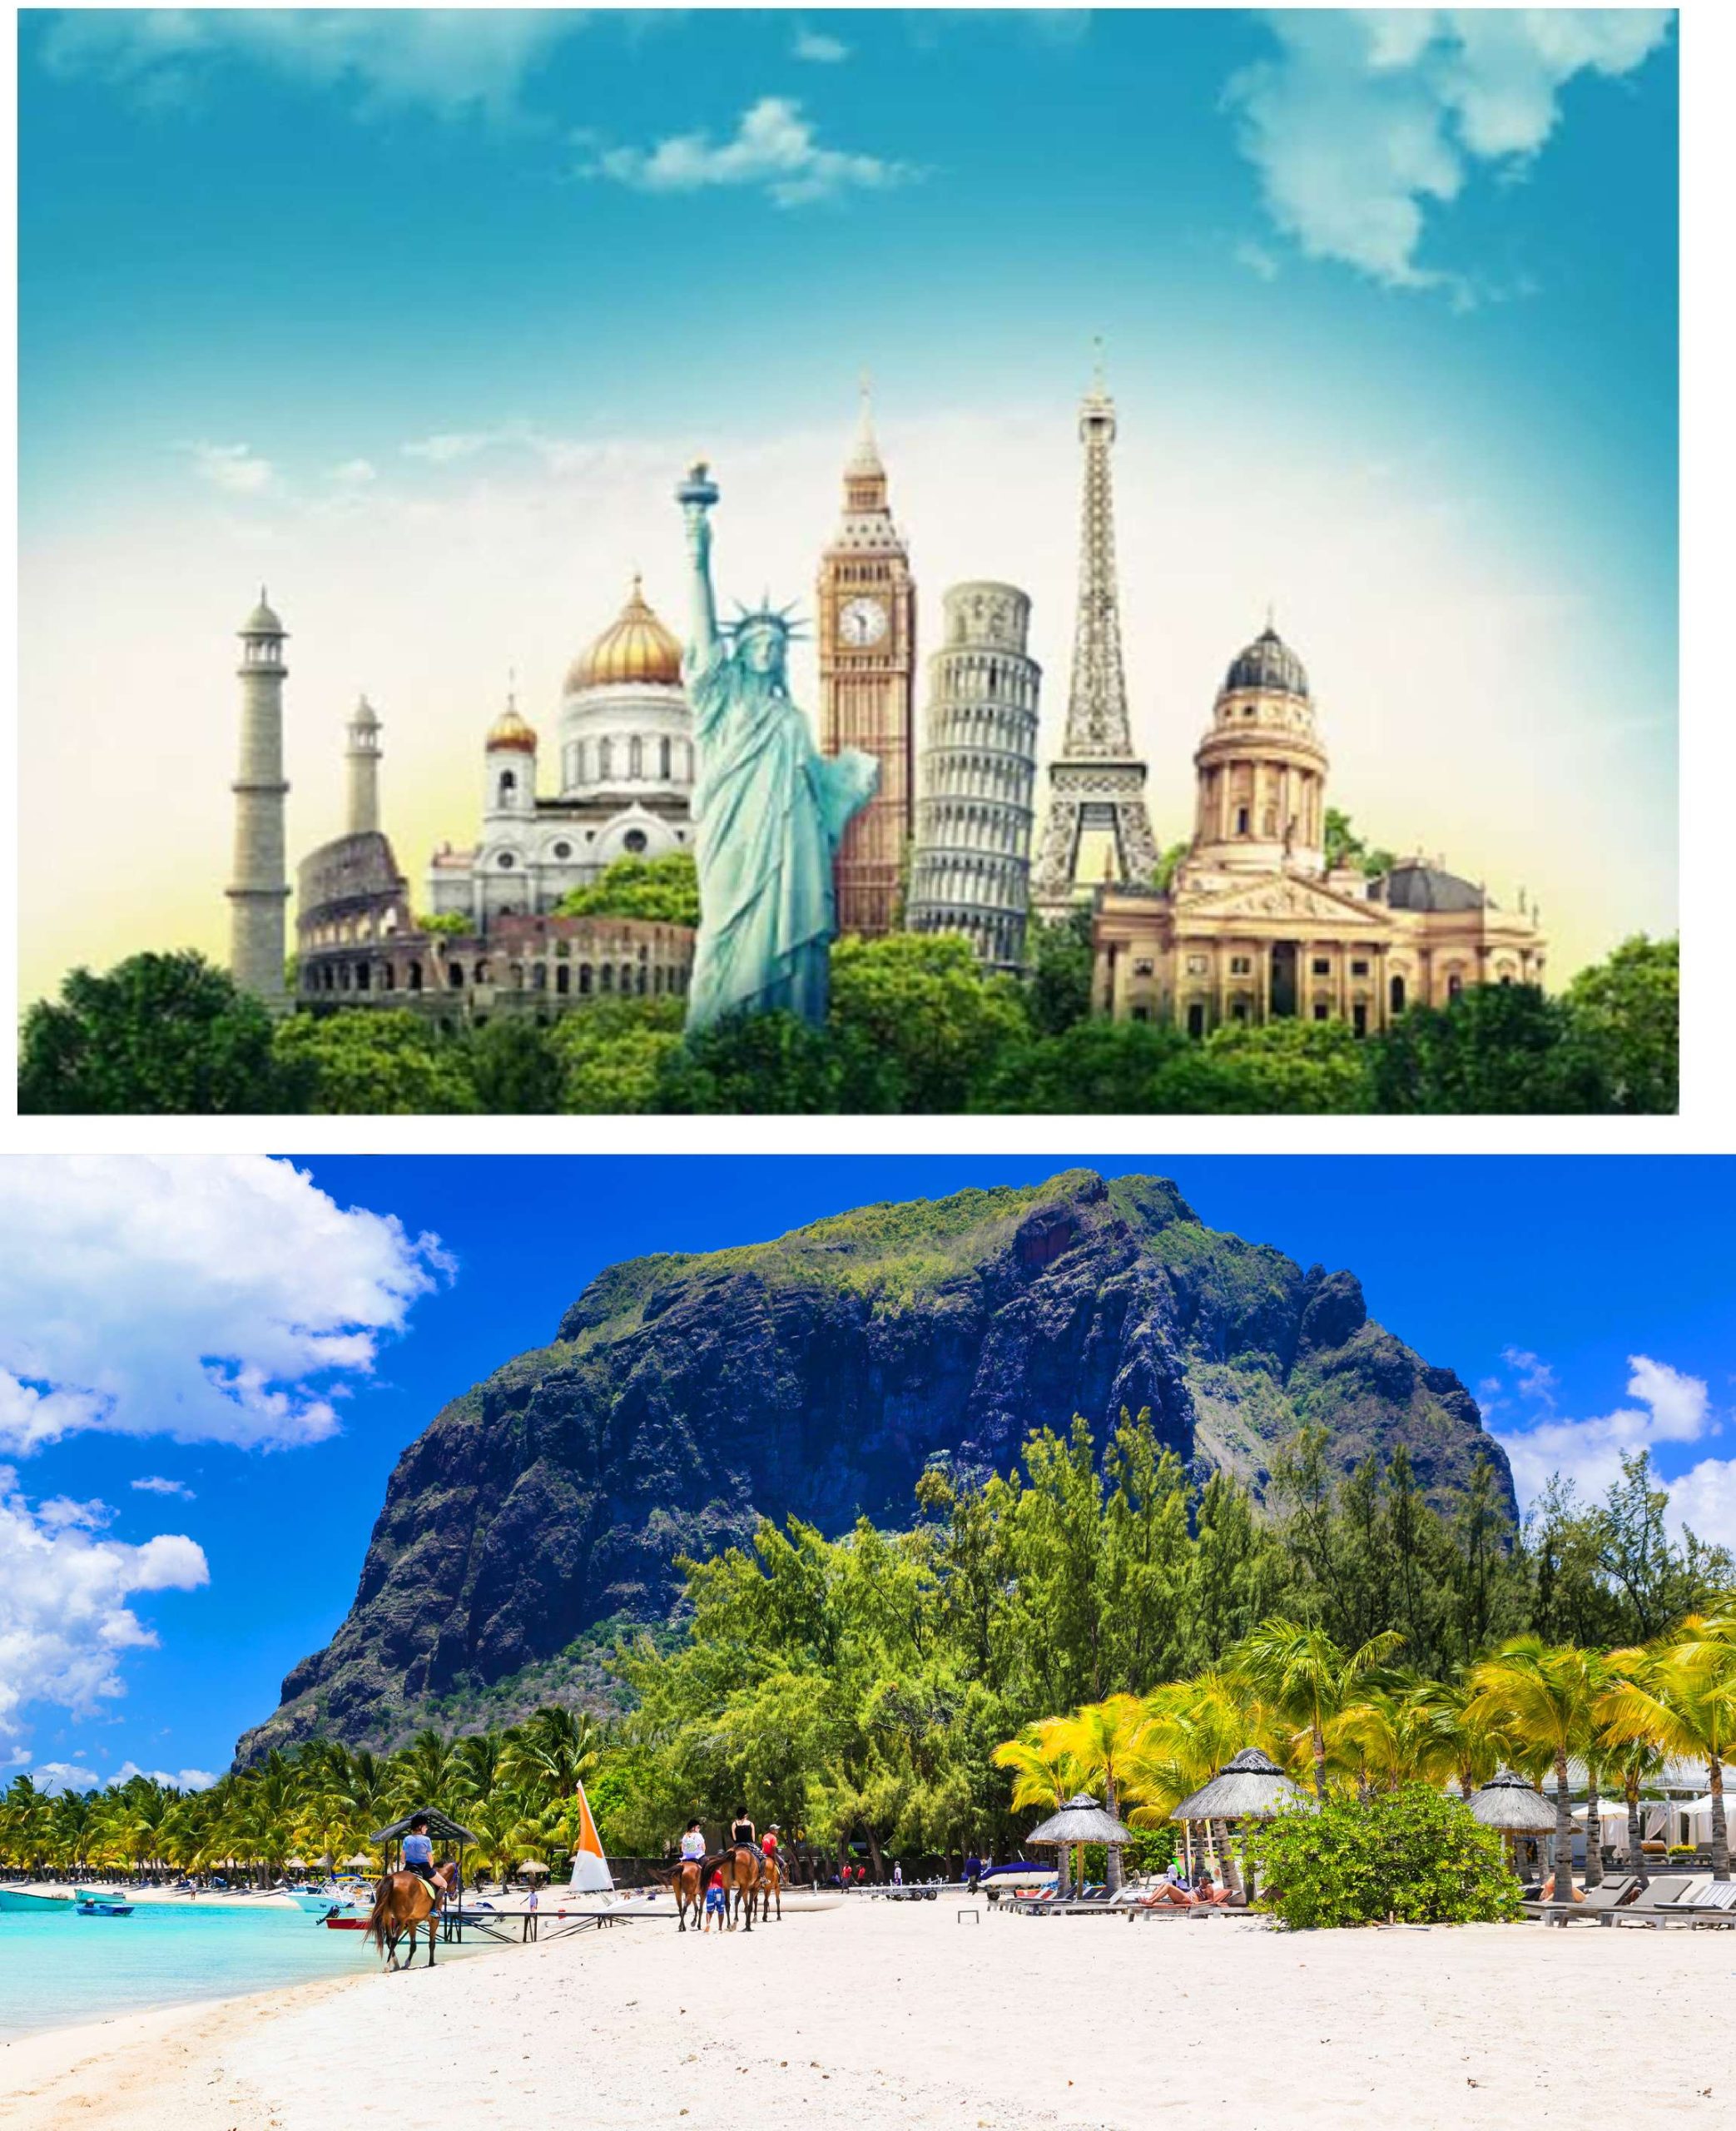 Differences Between Domestic and International Tourism